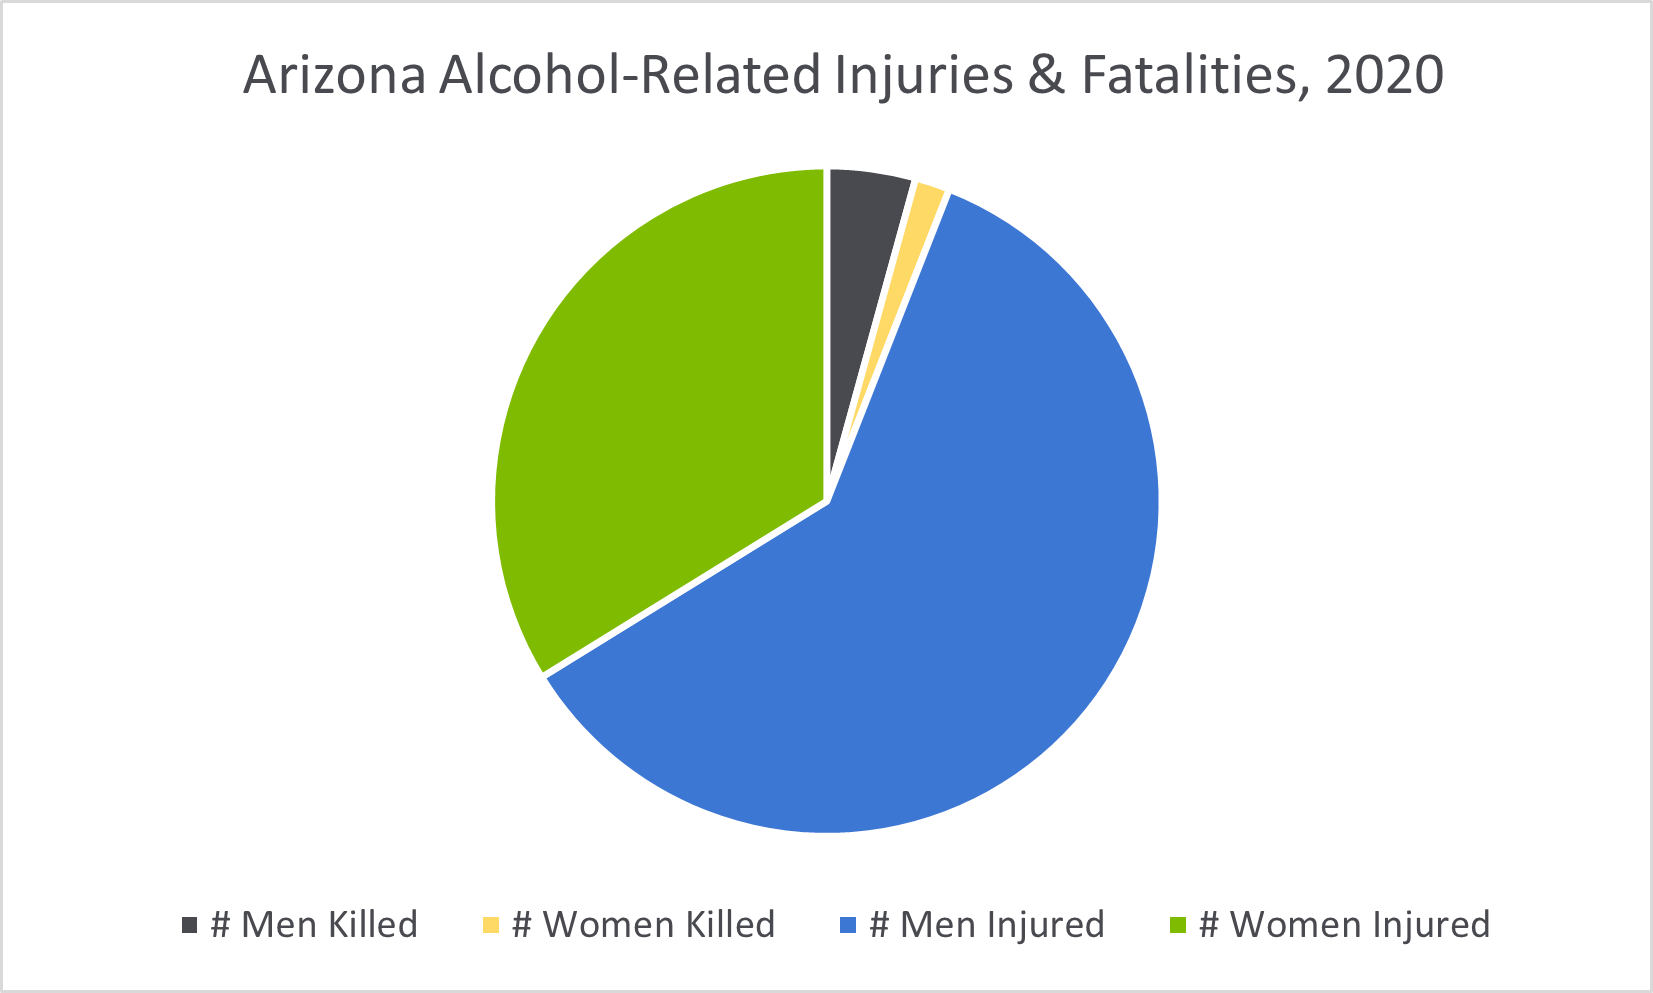 Alcohol Related Injuries & Fatalities in Arizona, 2020